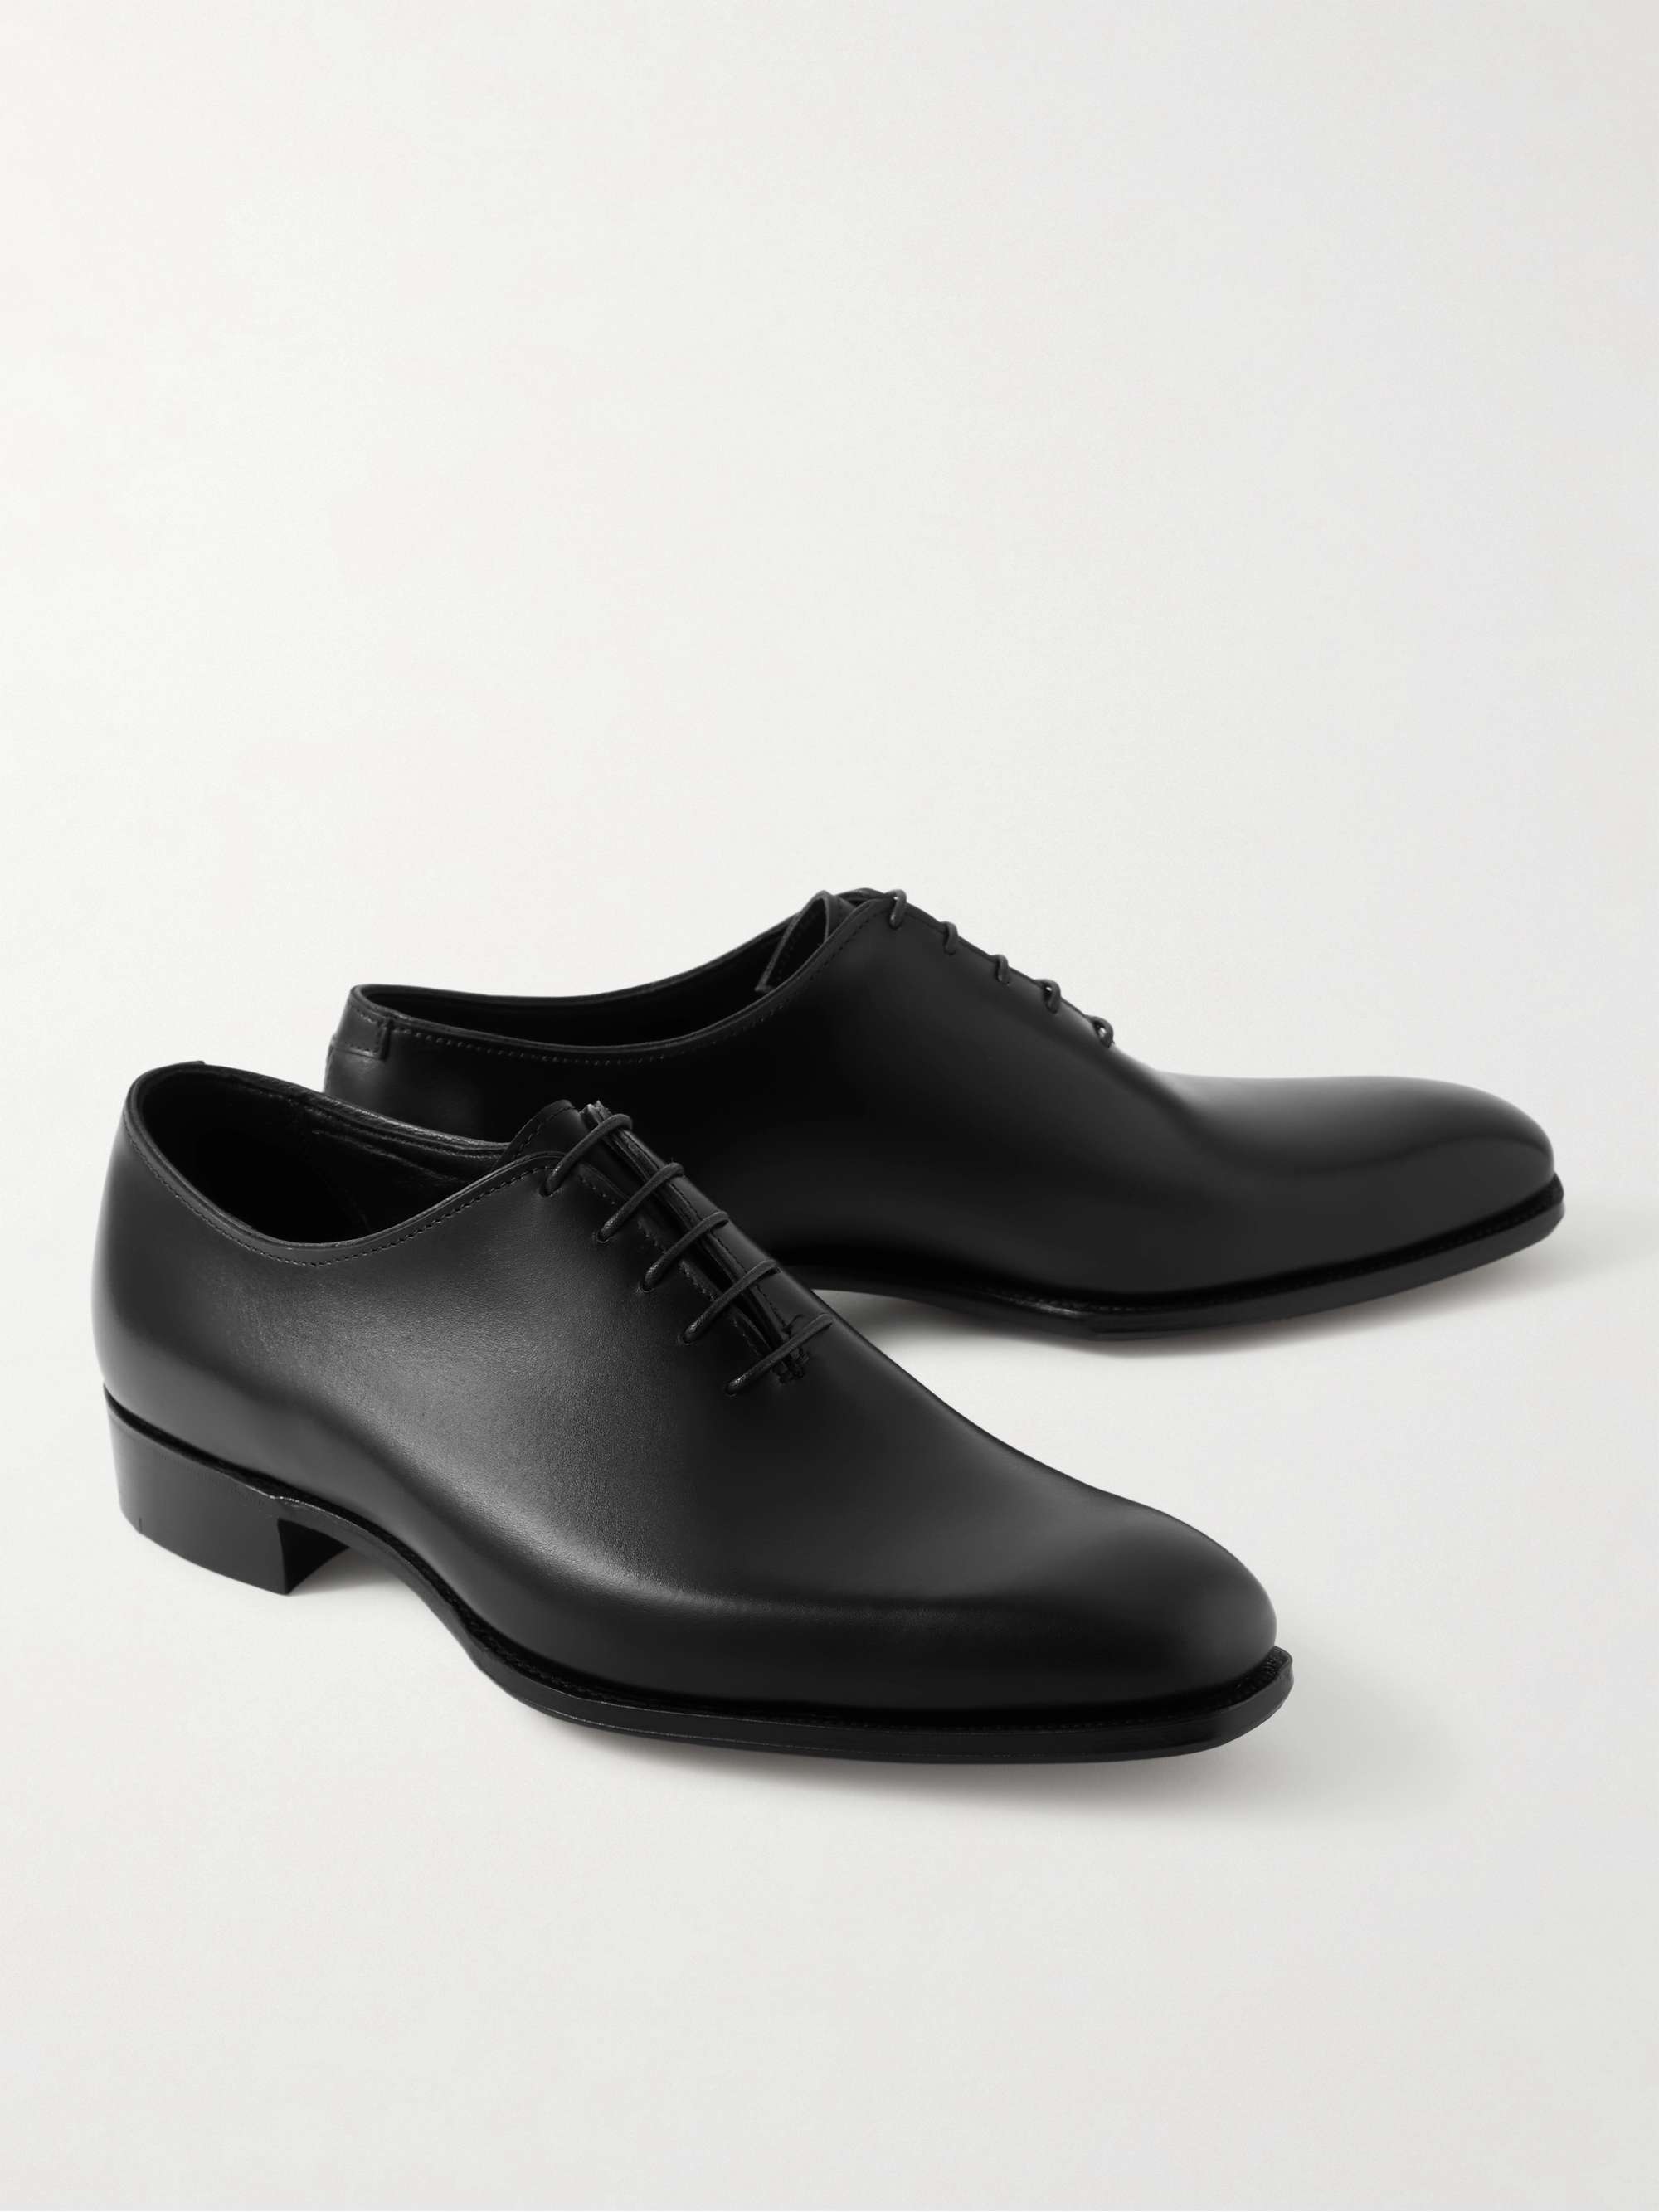 GEORGE CLEVERLEY Merlin Whole-Cut Leather Oxford Shoes